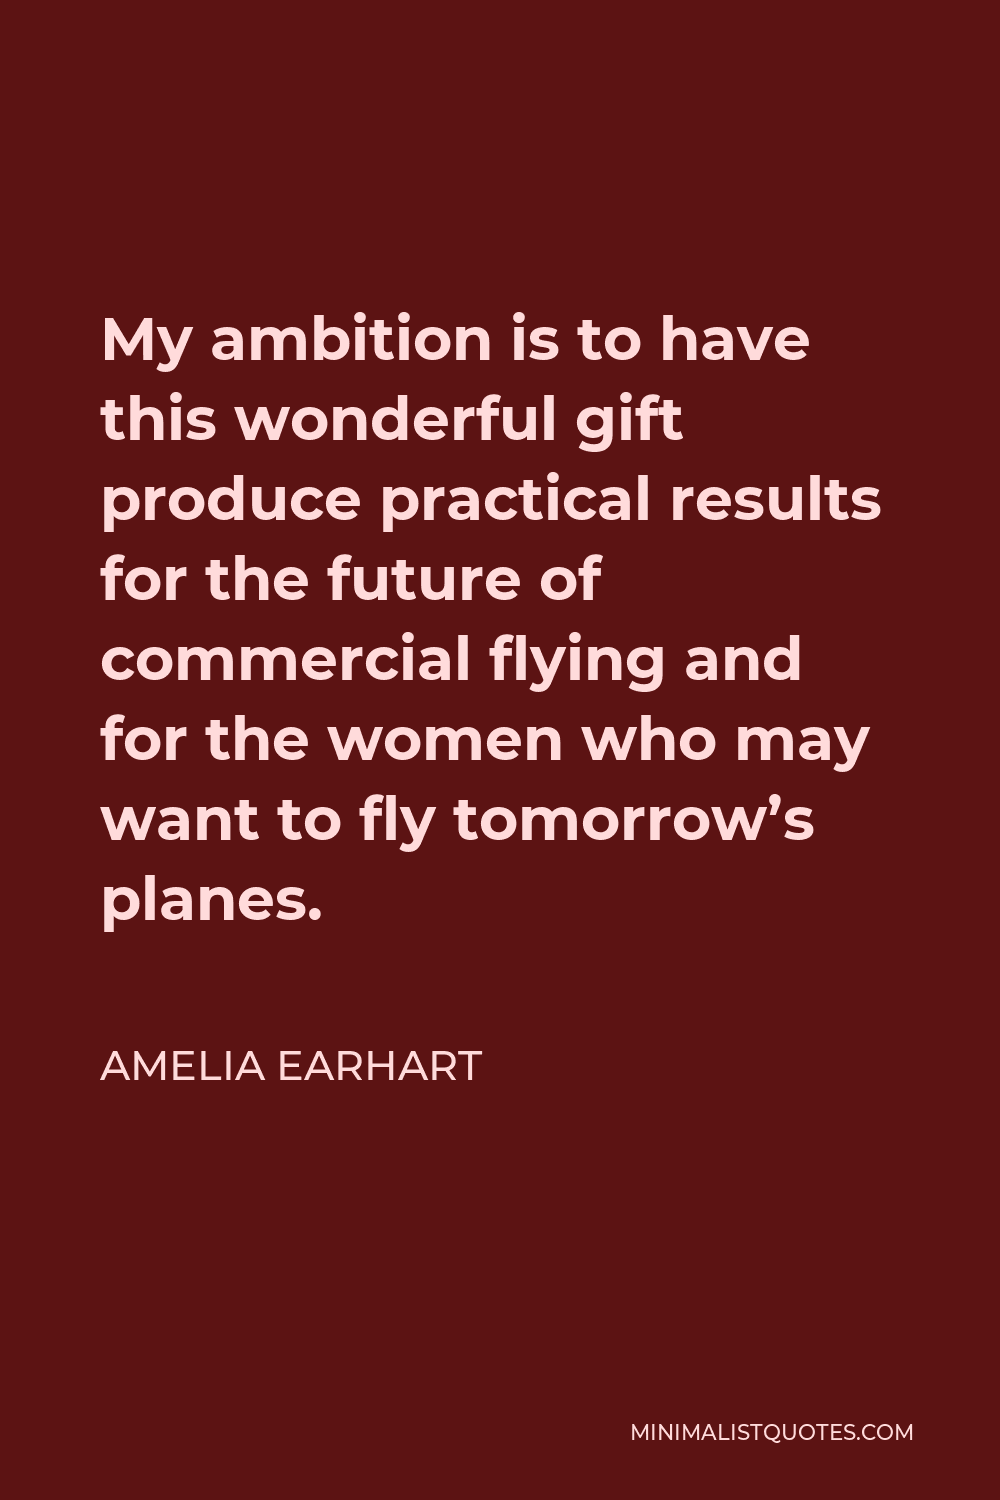 Amelia Earhart quote: Flying might not be all plain sailing, but